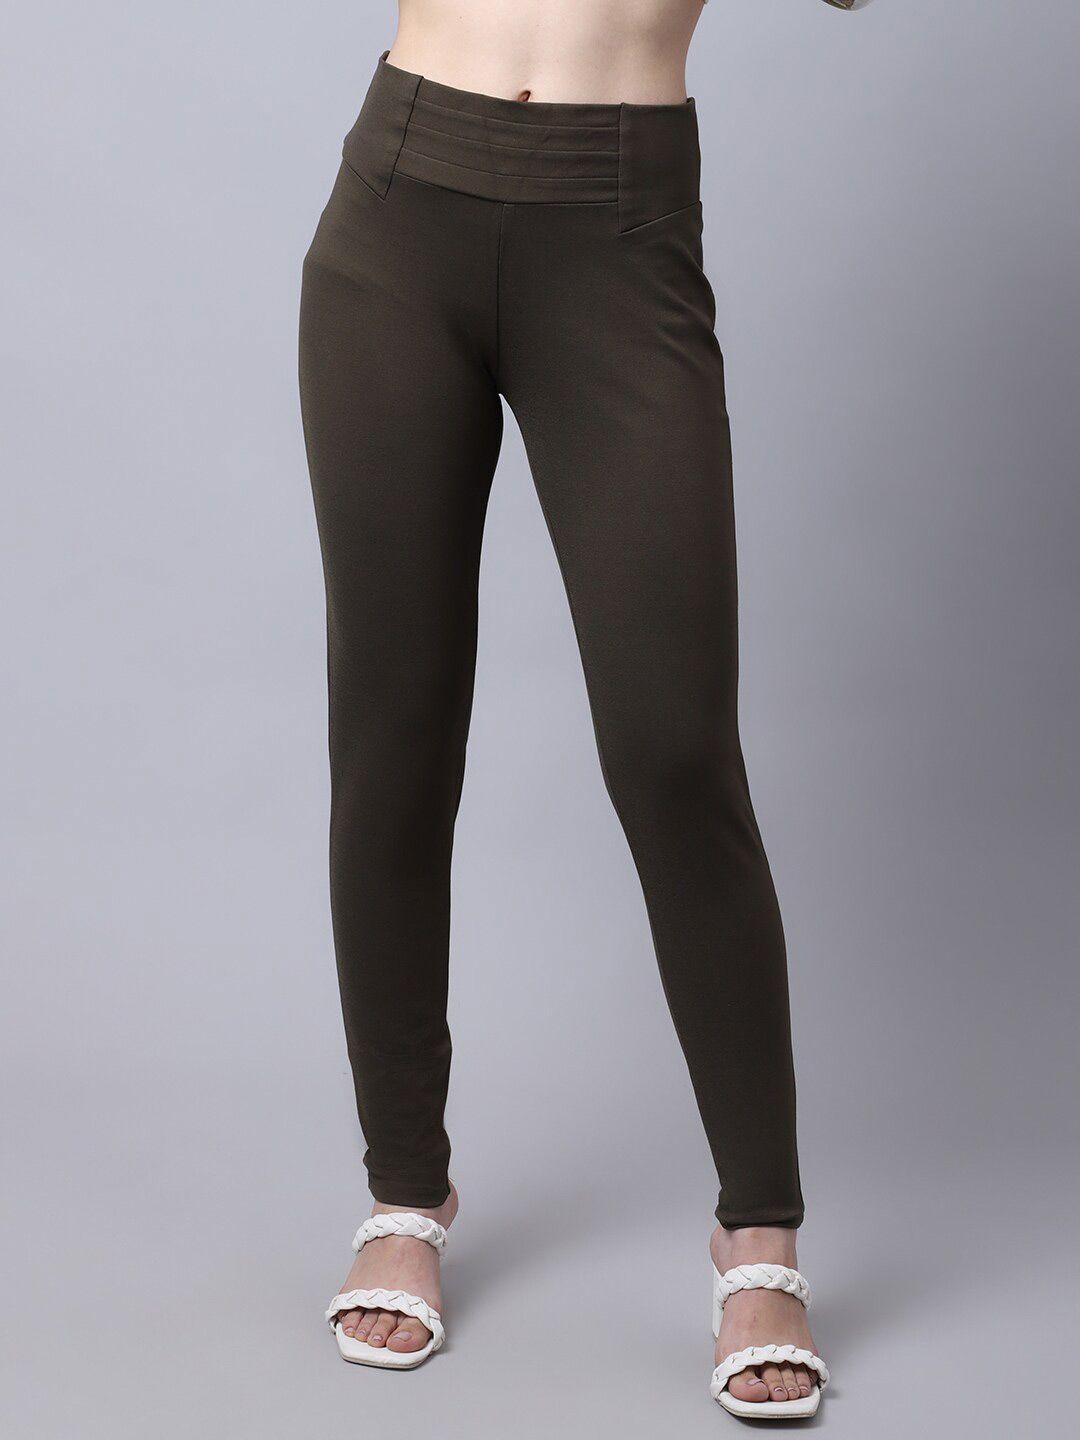 cantabil-women-olive-green-solid-cotton-treggings